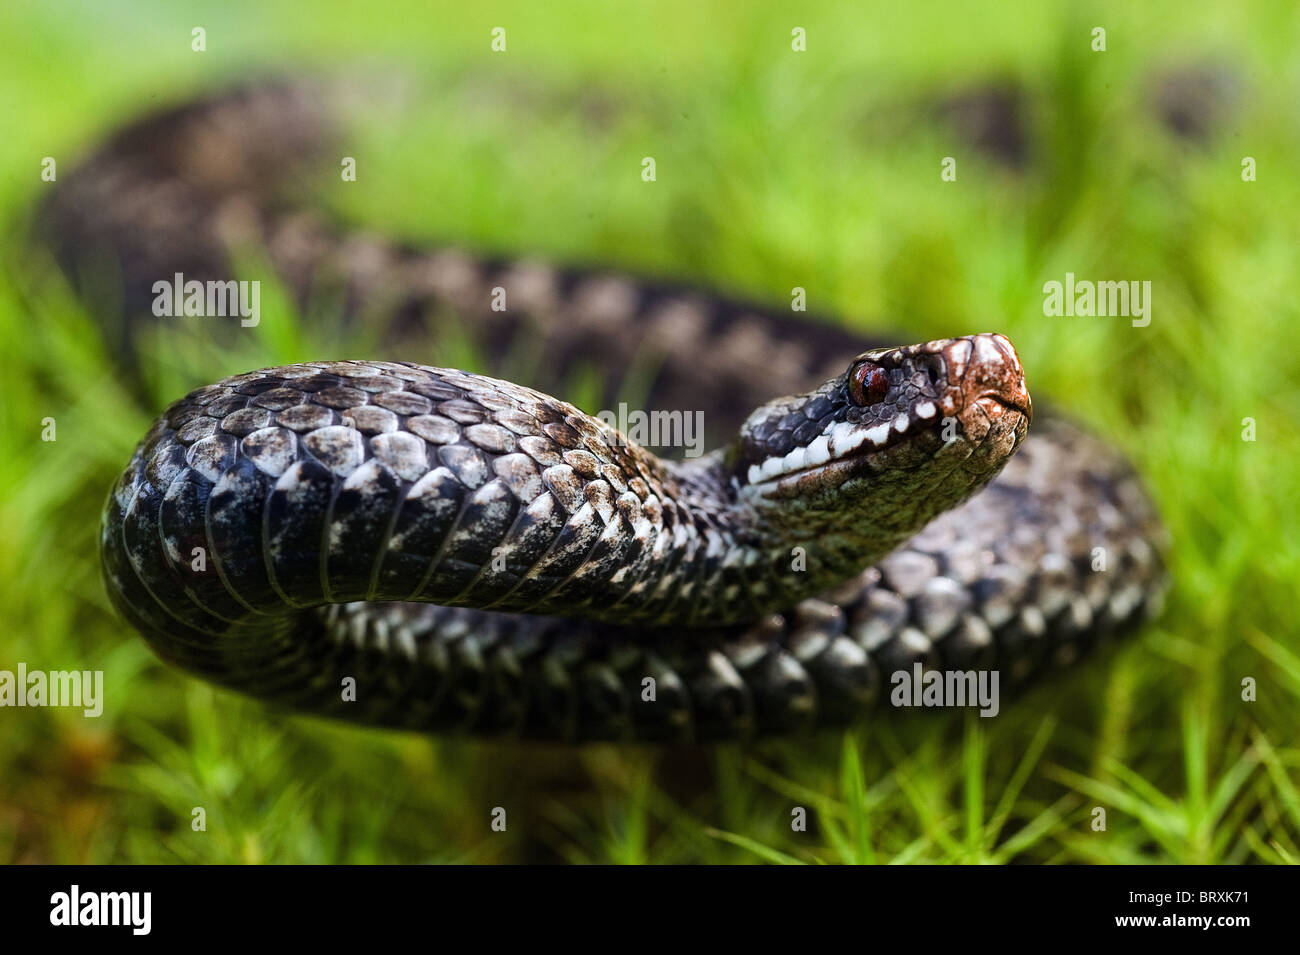 The angered viper. Stock Photo